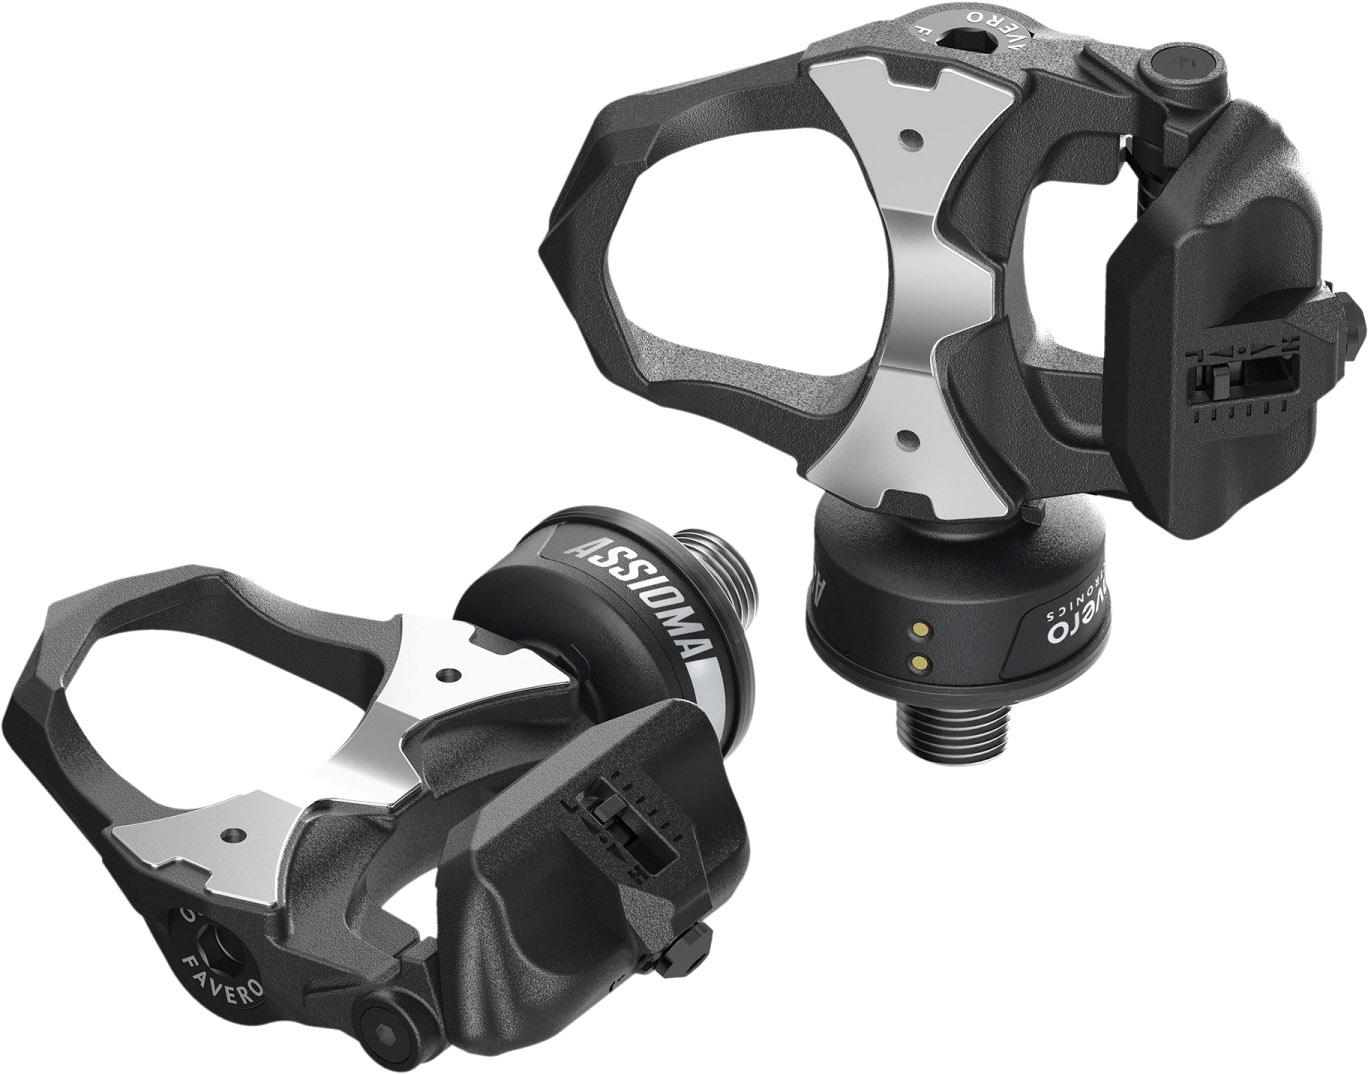 Favero Assioma Duo Power Meter Pedals - Black/grey